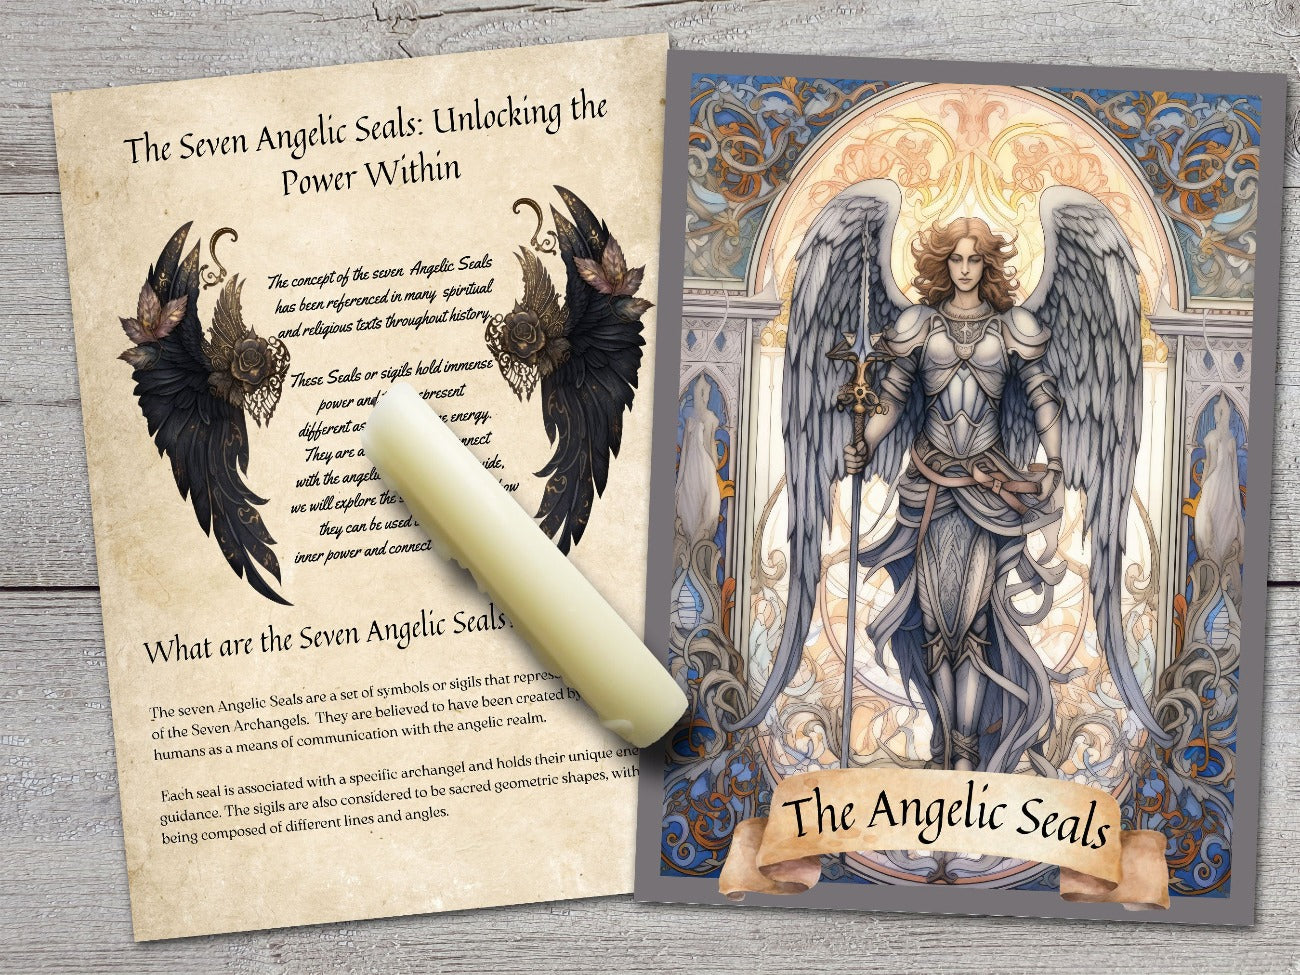 Seven Angelic Seals, Unlocking the Power Within, and the Angelic Seals title page - Morgana Magick Spell